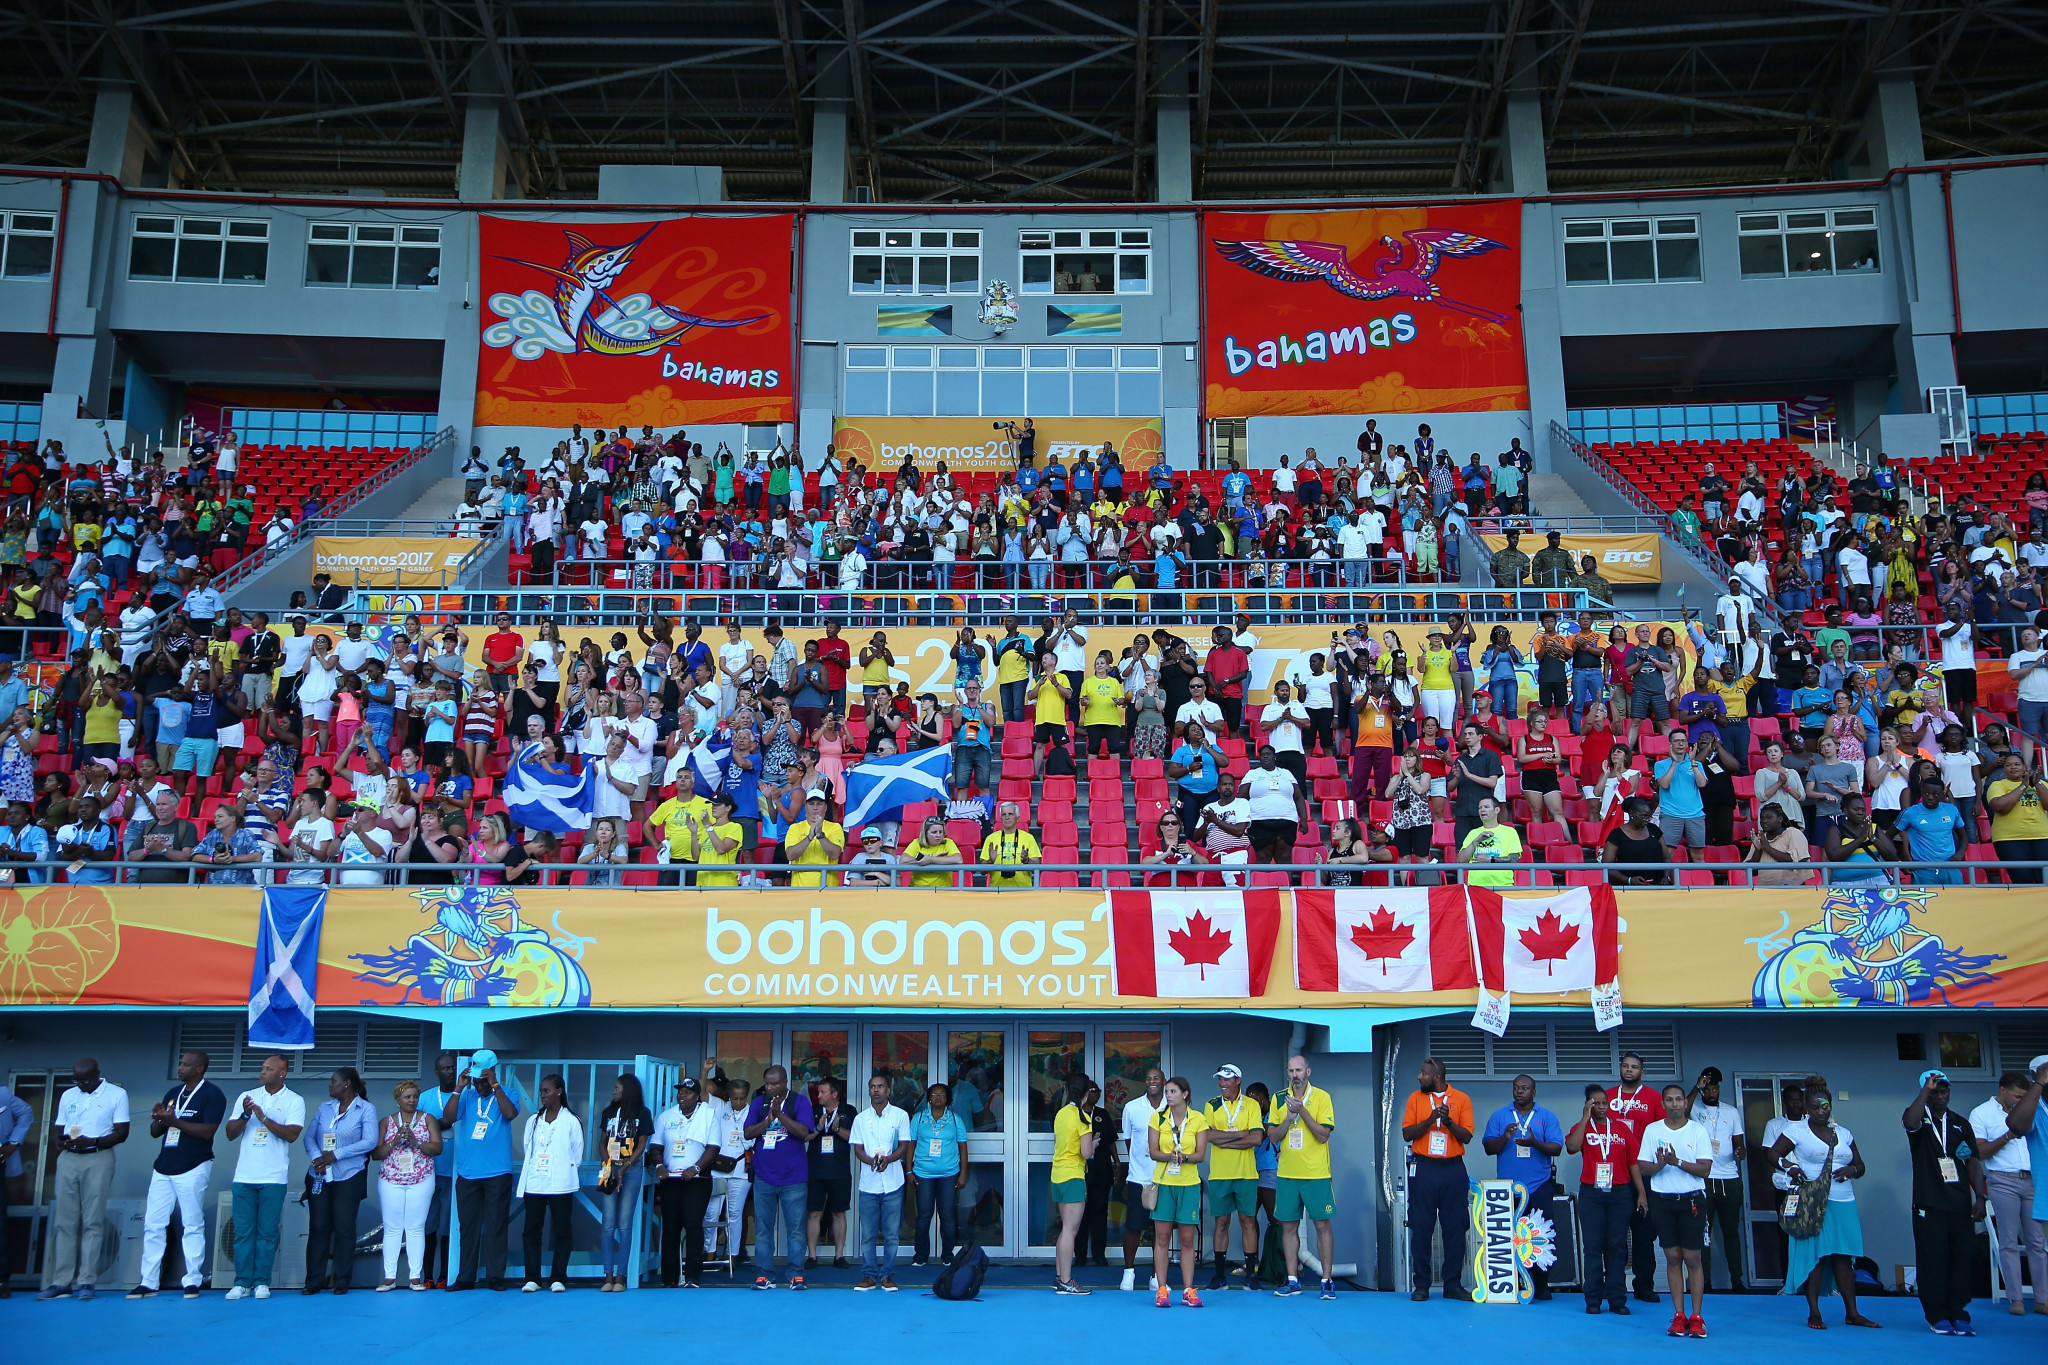 Bahamas hosted the Commonwealth Youth Games in 2017 ©Getty Images